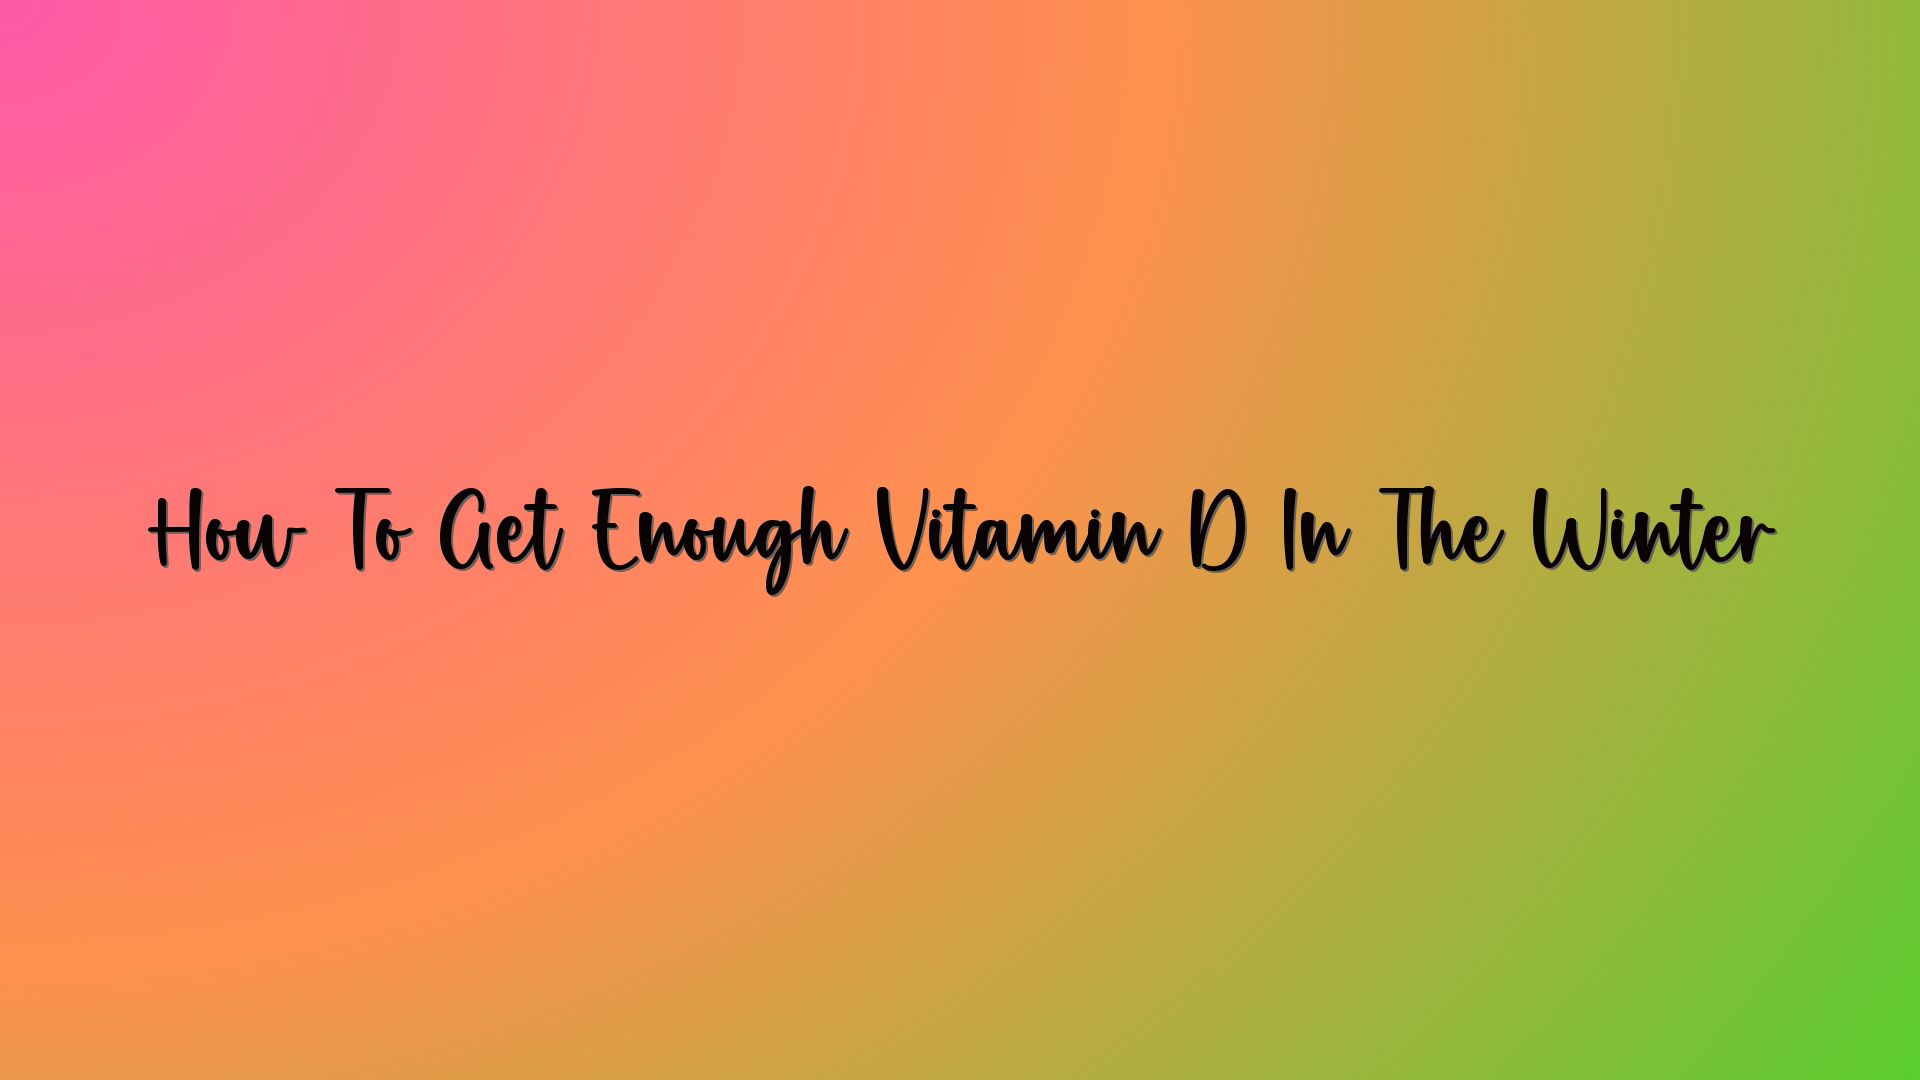 How To Get Enough Vitamin D In The Winter